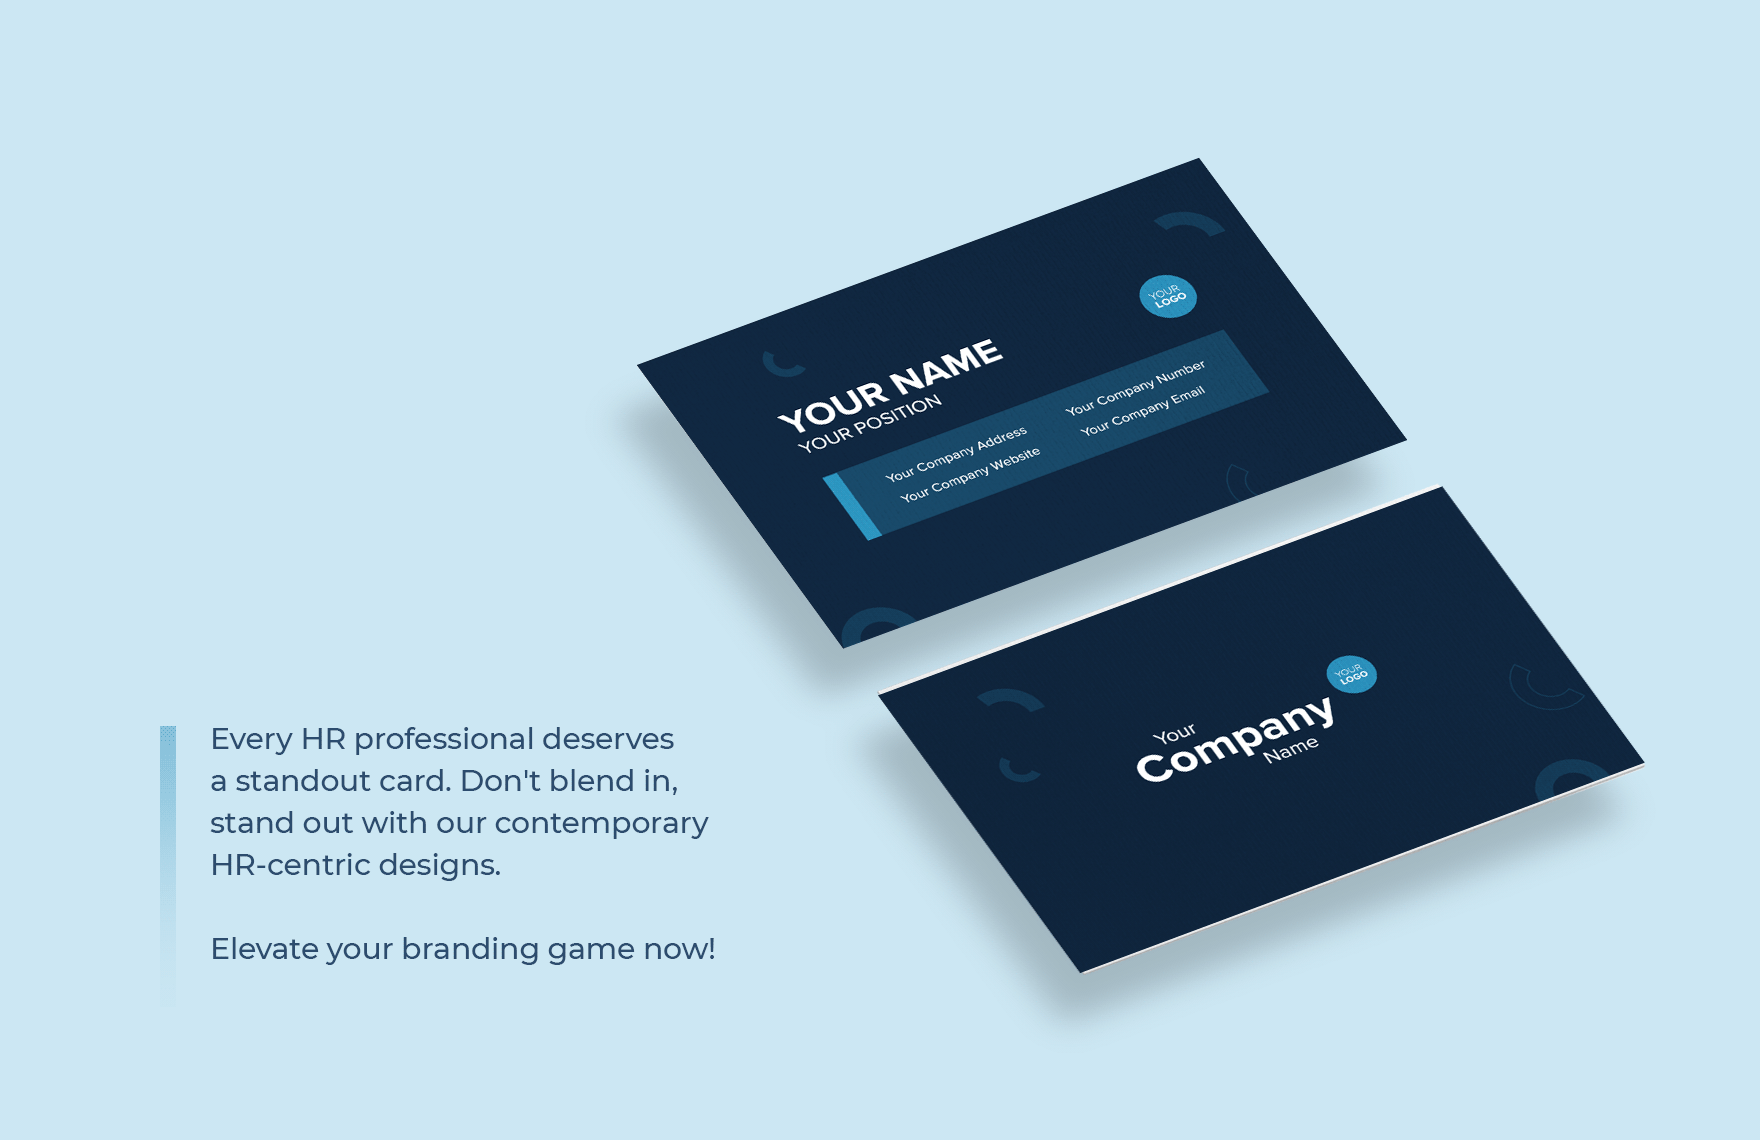 Social Media Manager Business Card Template